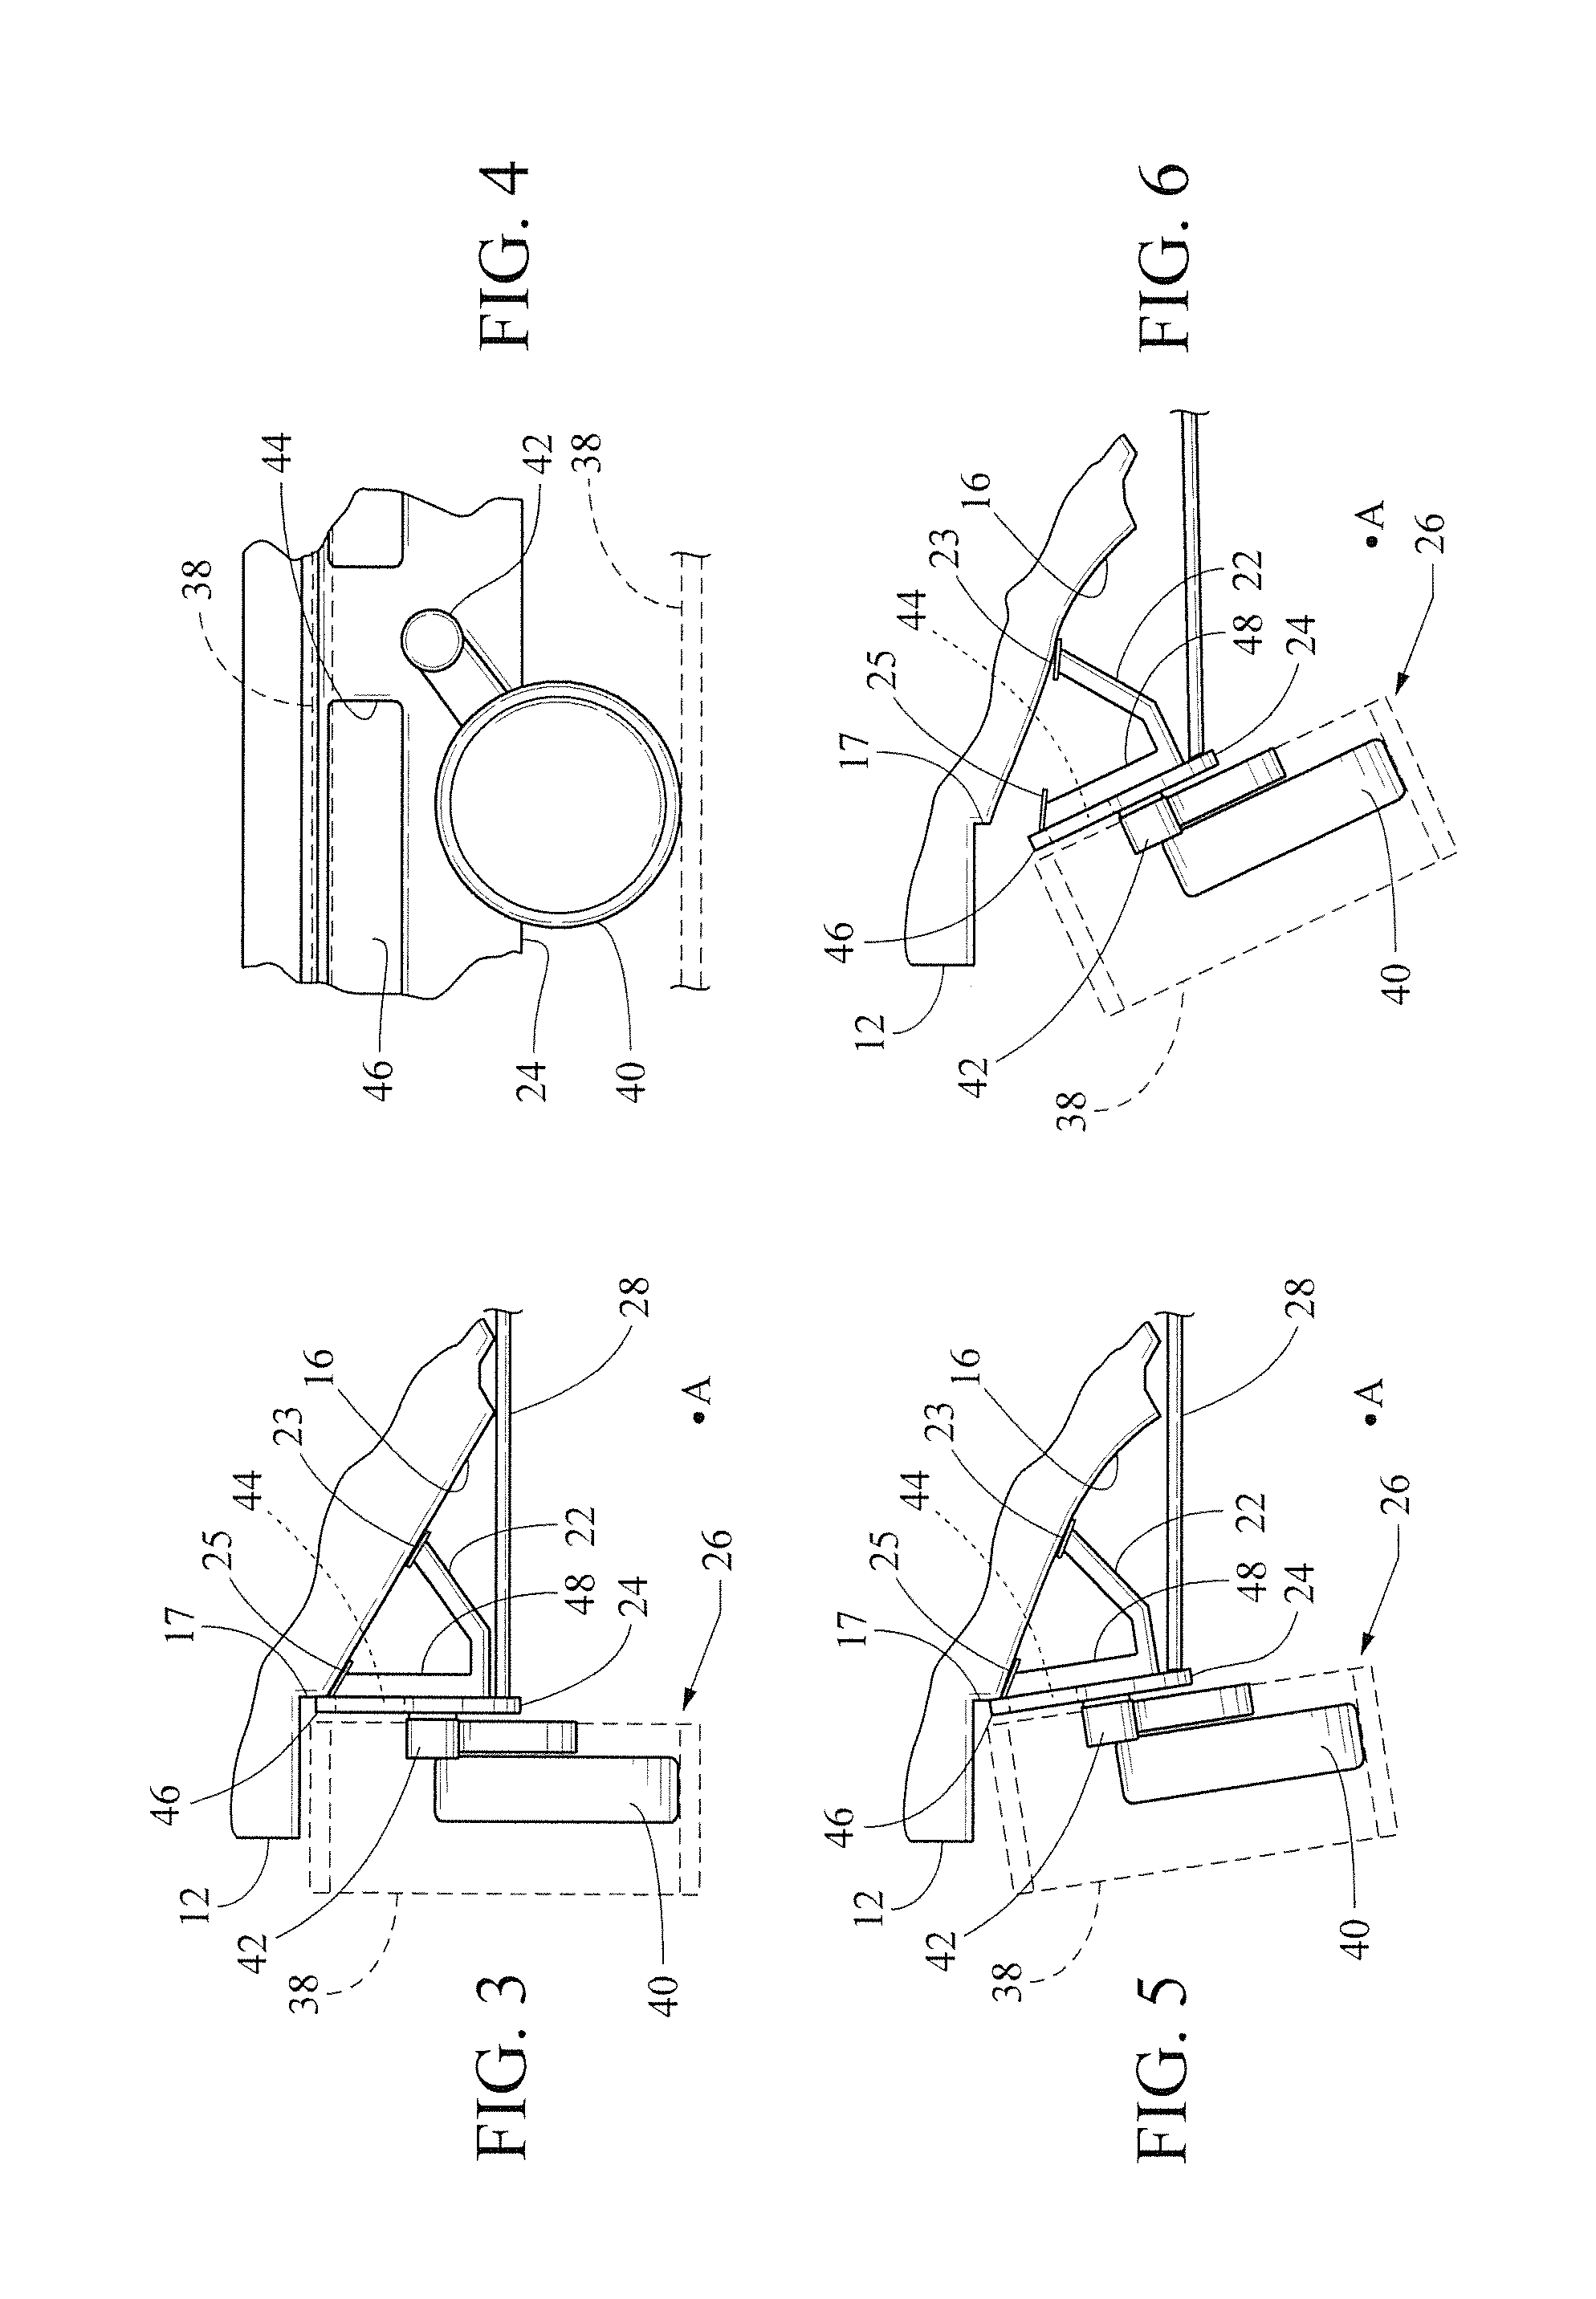 Vehicle with sacrificial underbody structure